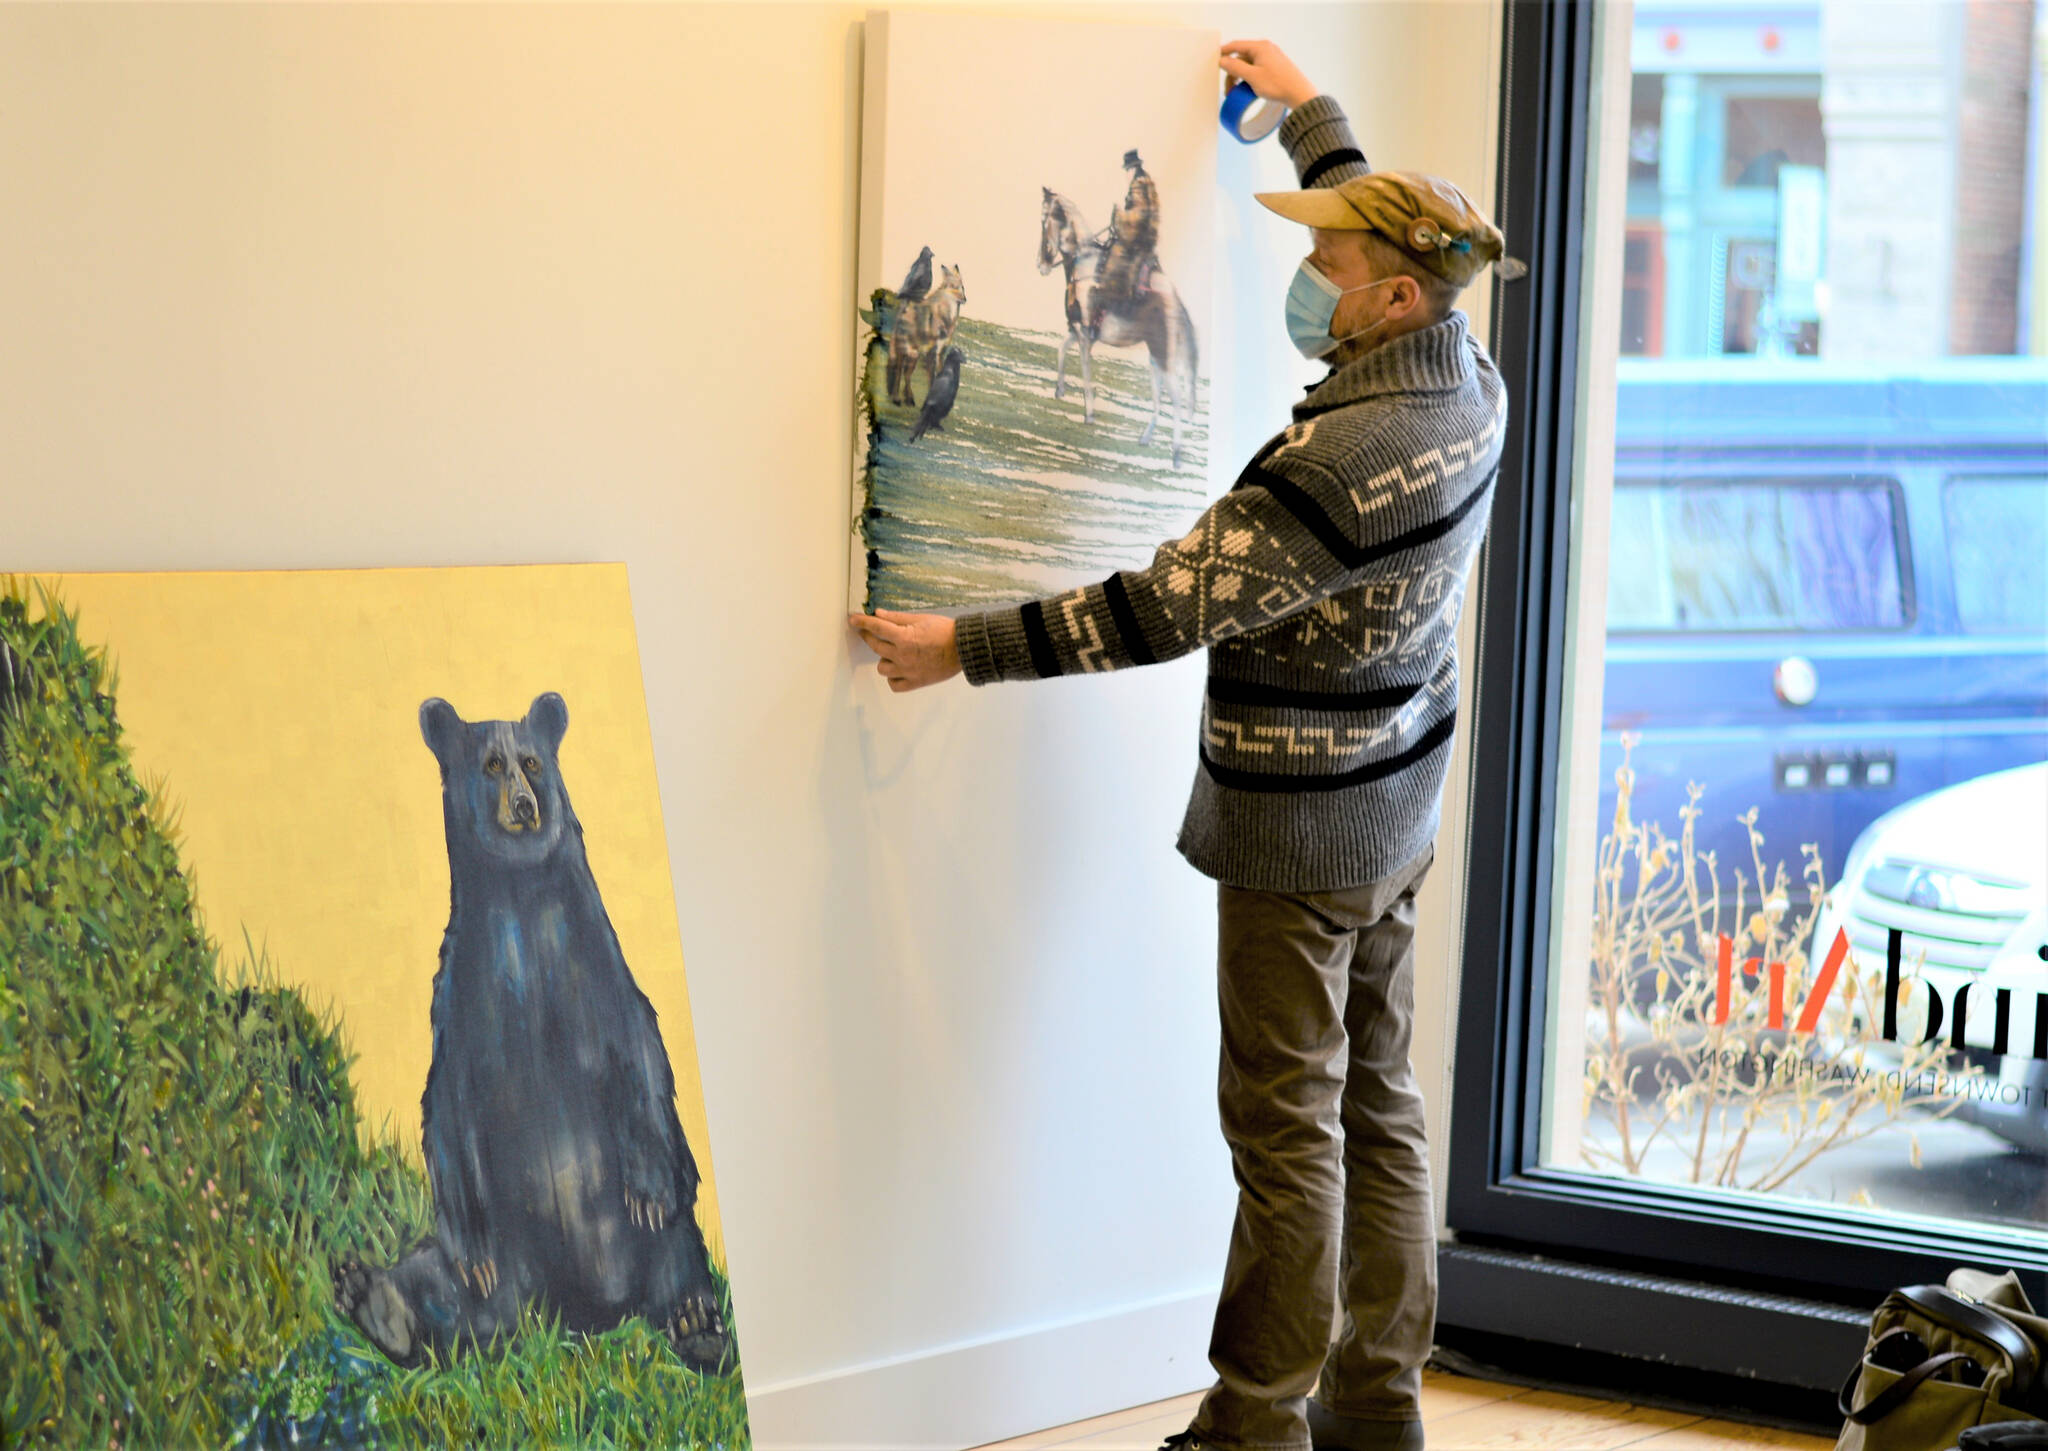 Todd Horton has installed his new exhibition, "Mystic West," at Port Townsend's Grover Gallery. The show includes six afternoons of live painting by the artist, this weekend and in February and March. Diane Urbani de la Paz/Peninsula Daily News